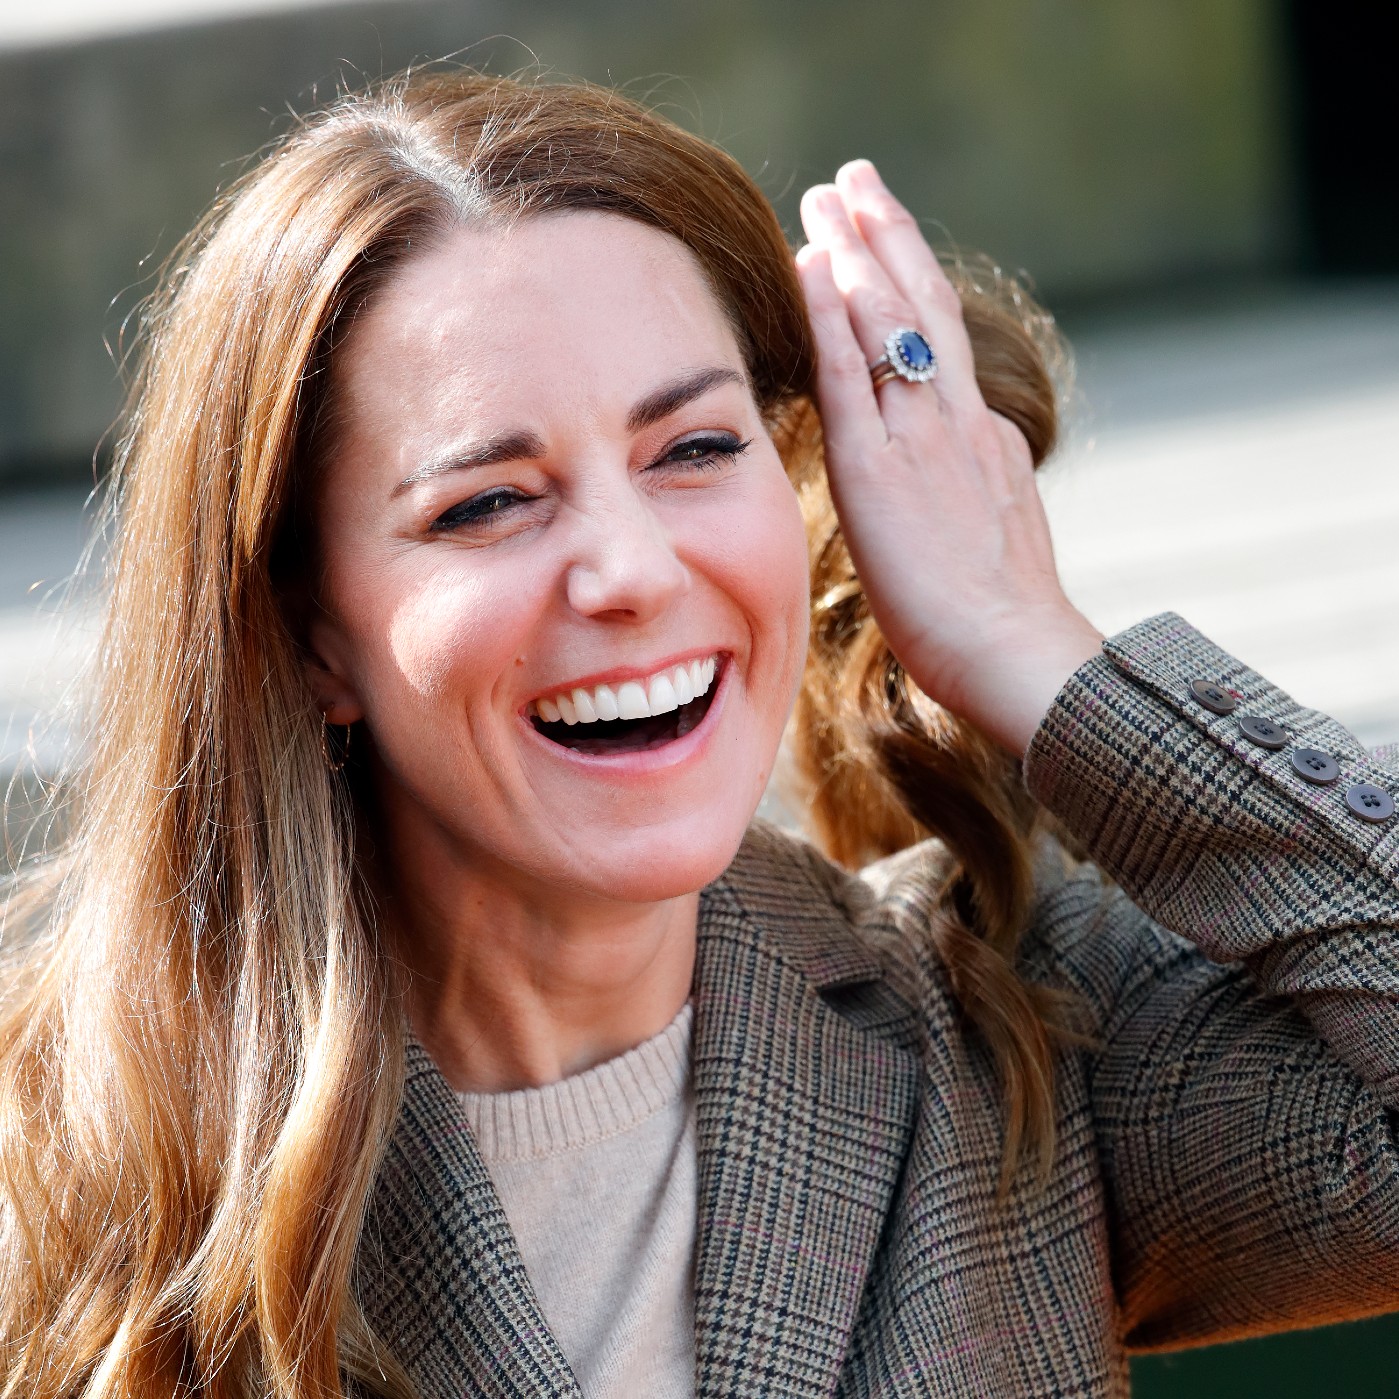 Kate Middleton's Engagement Ring: Details, Facts & Photos